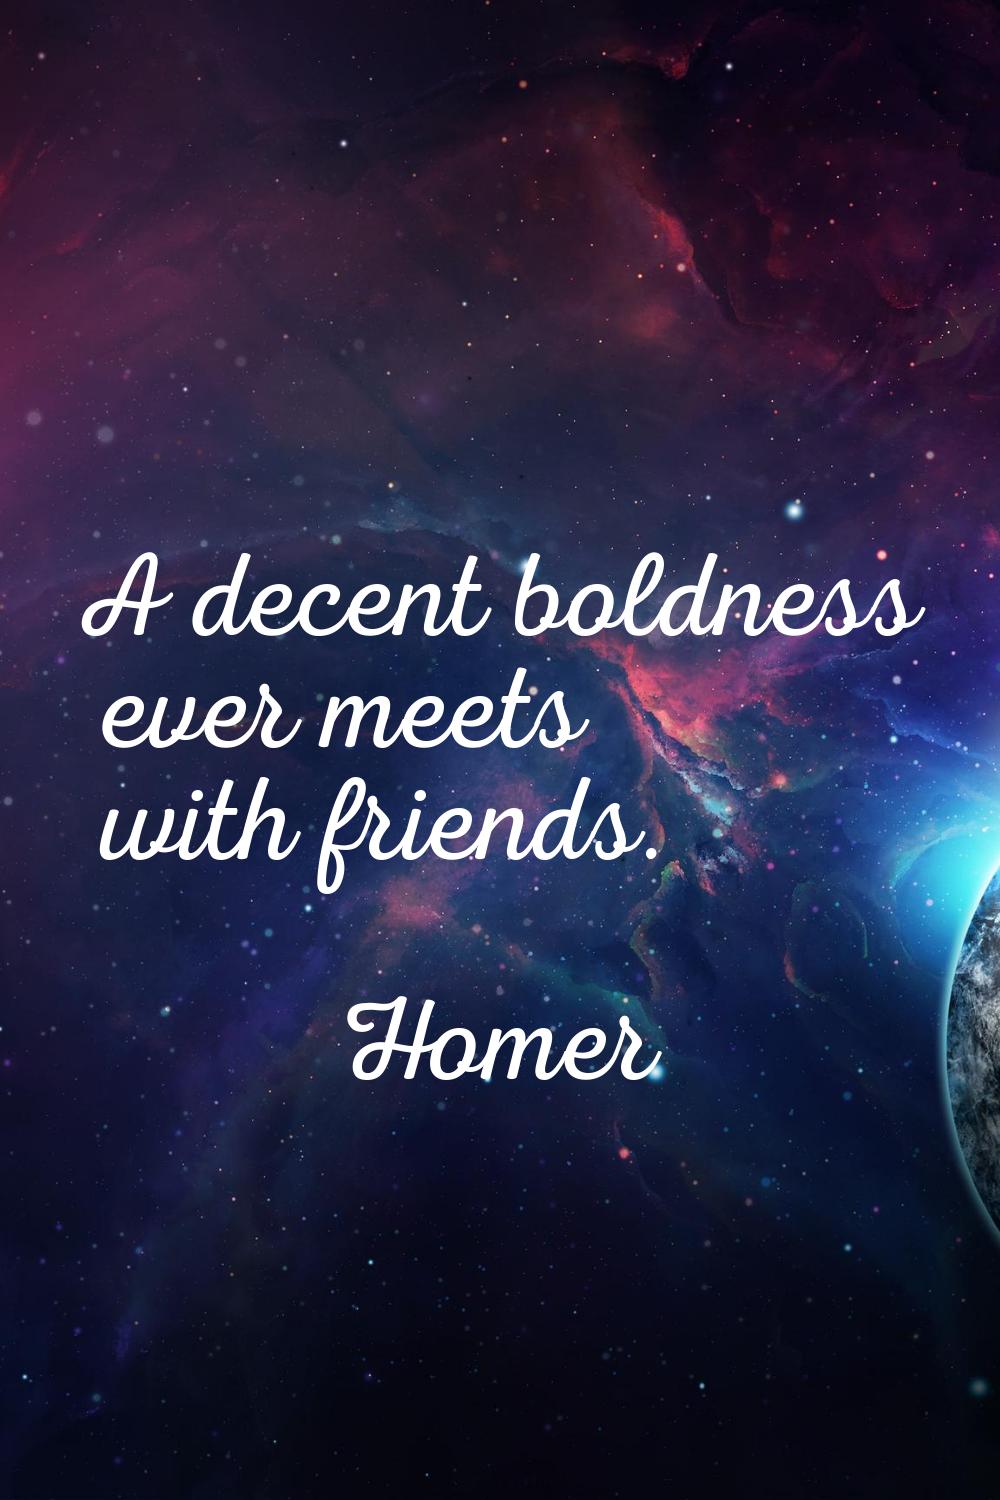 A decent boldness ever meets with friends.